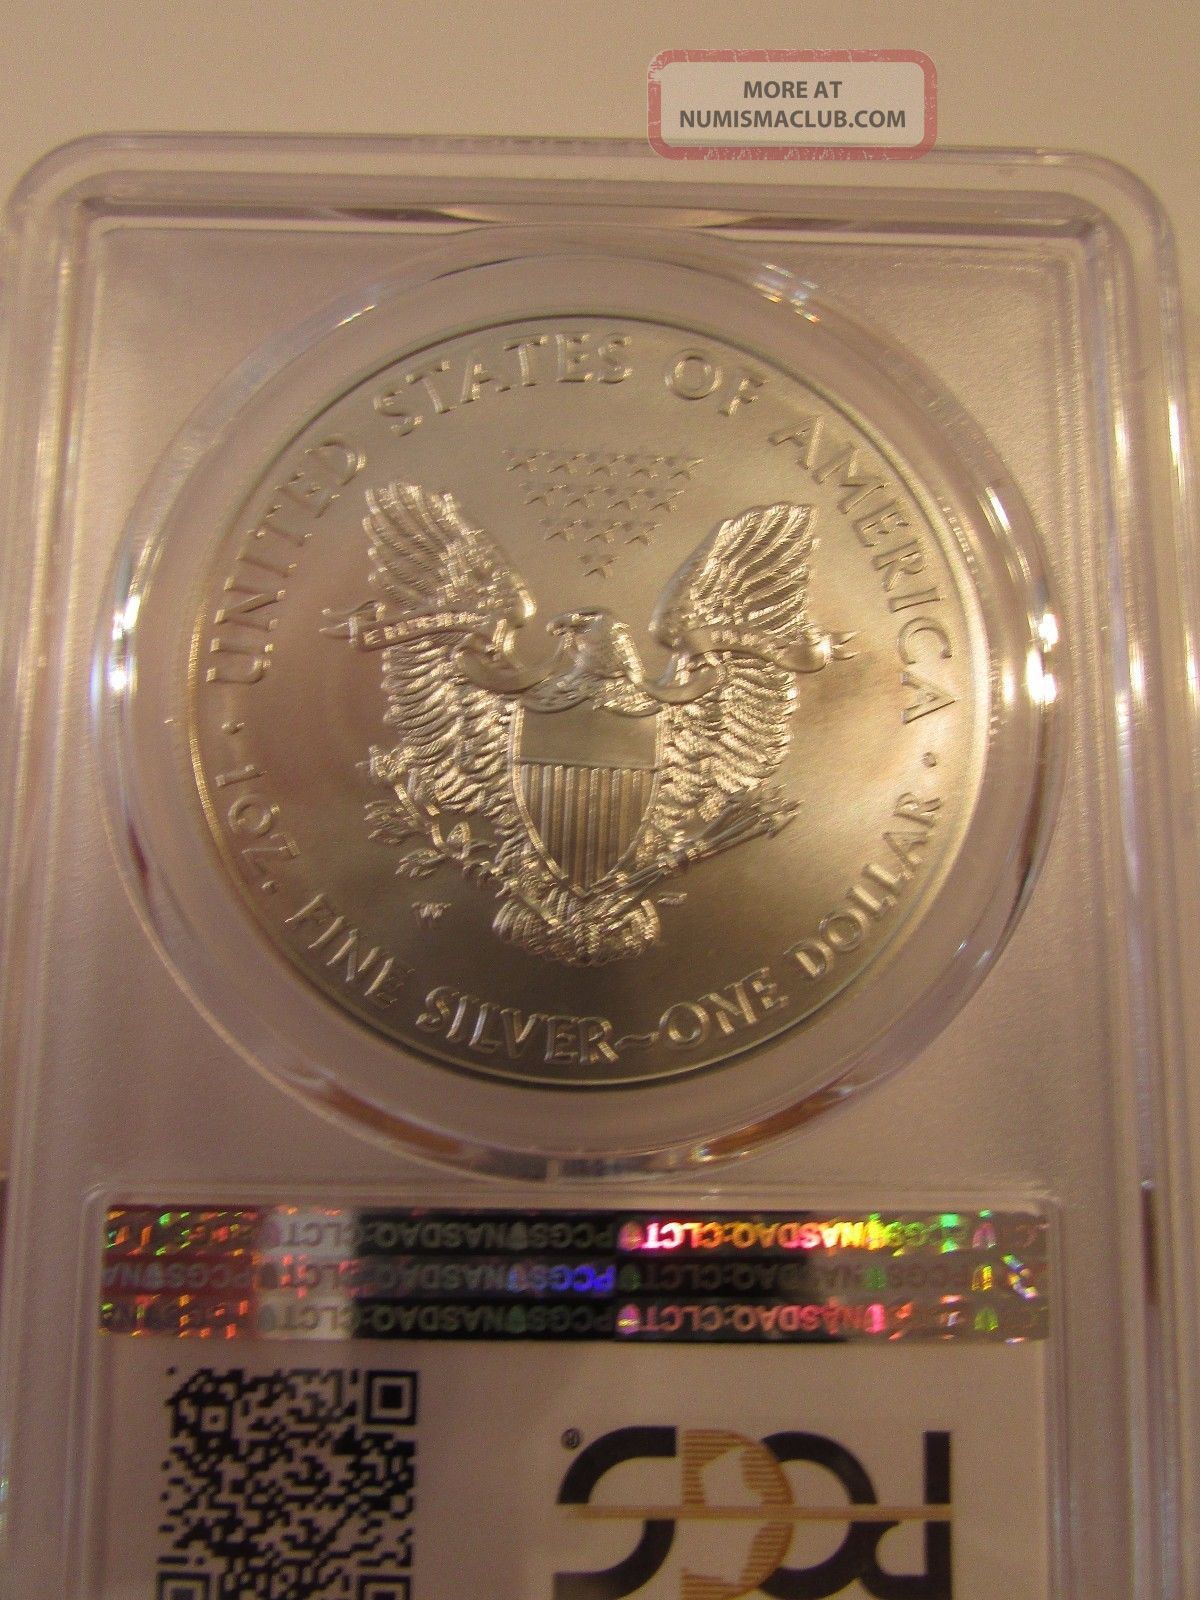 2013 - W Burnished Silver Eagle Pcgs Sp70. Proof " Perfect Coin